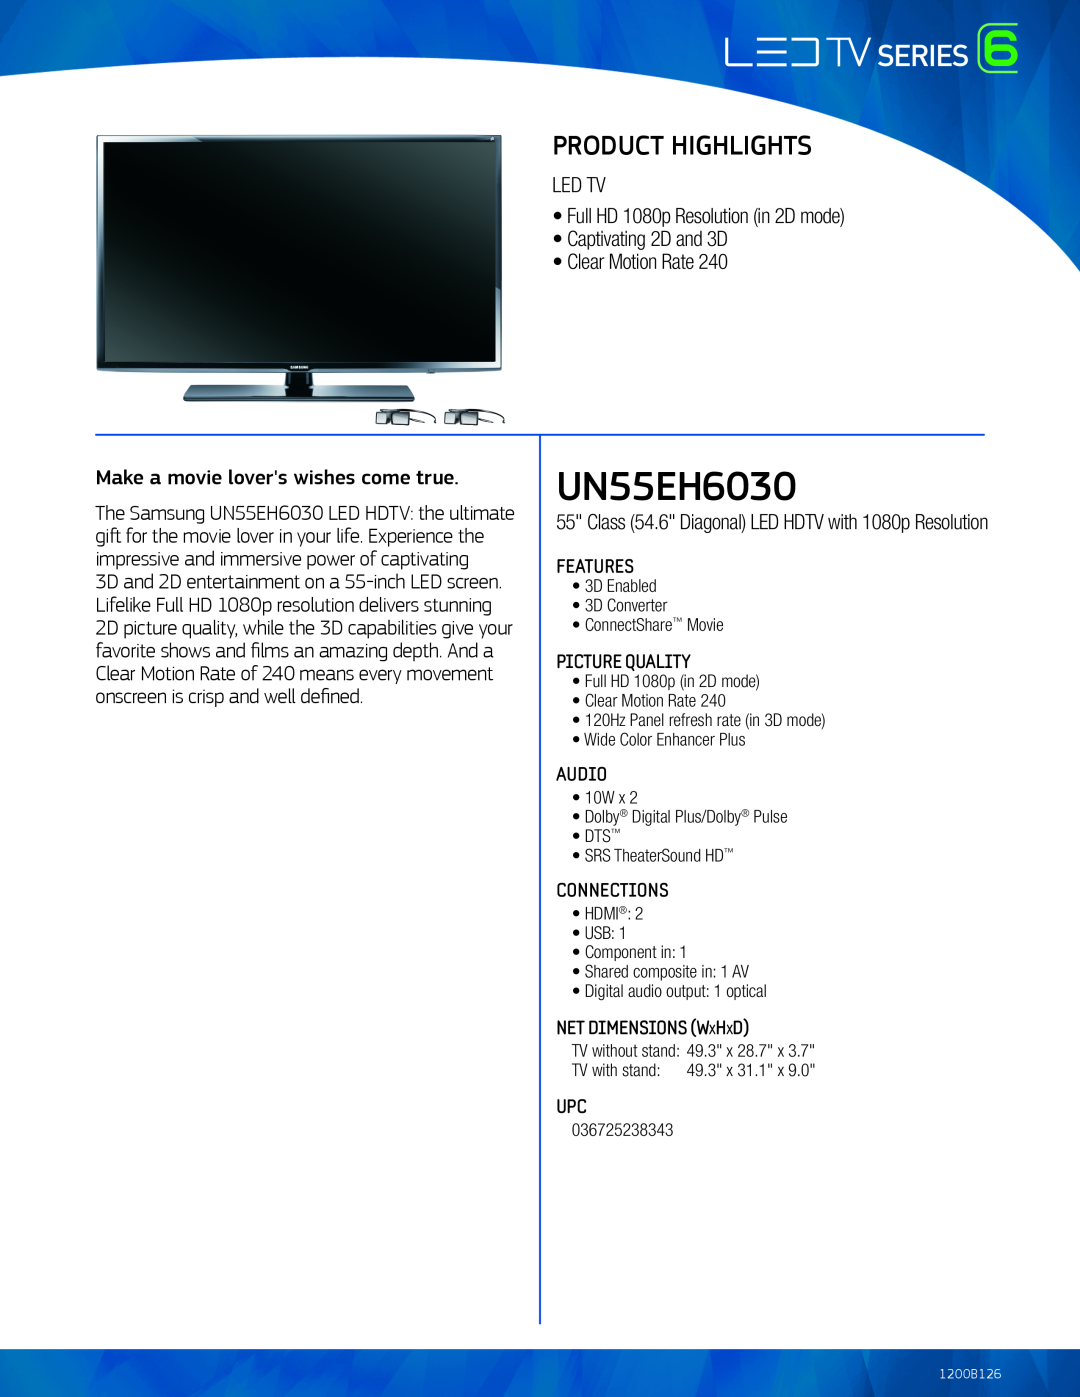 Samsung UN55EH6030 dimensions Product Highlights, LED TV Full HD 1080p Resolution in 2D mode Captivating 2D and 3D, Audio 